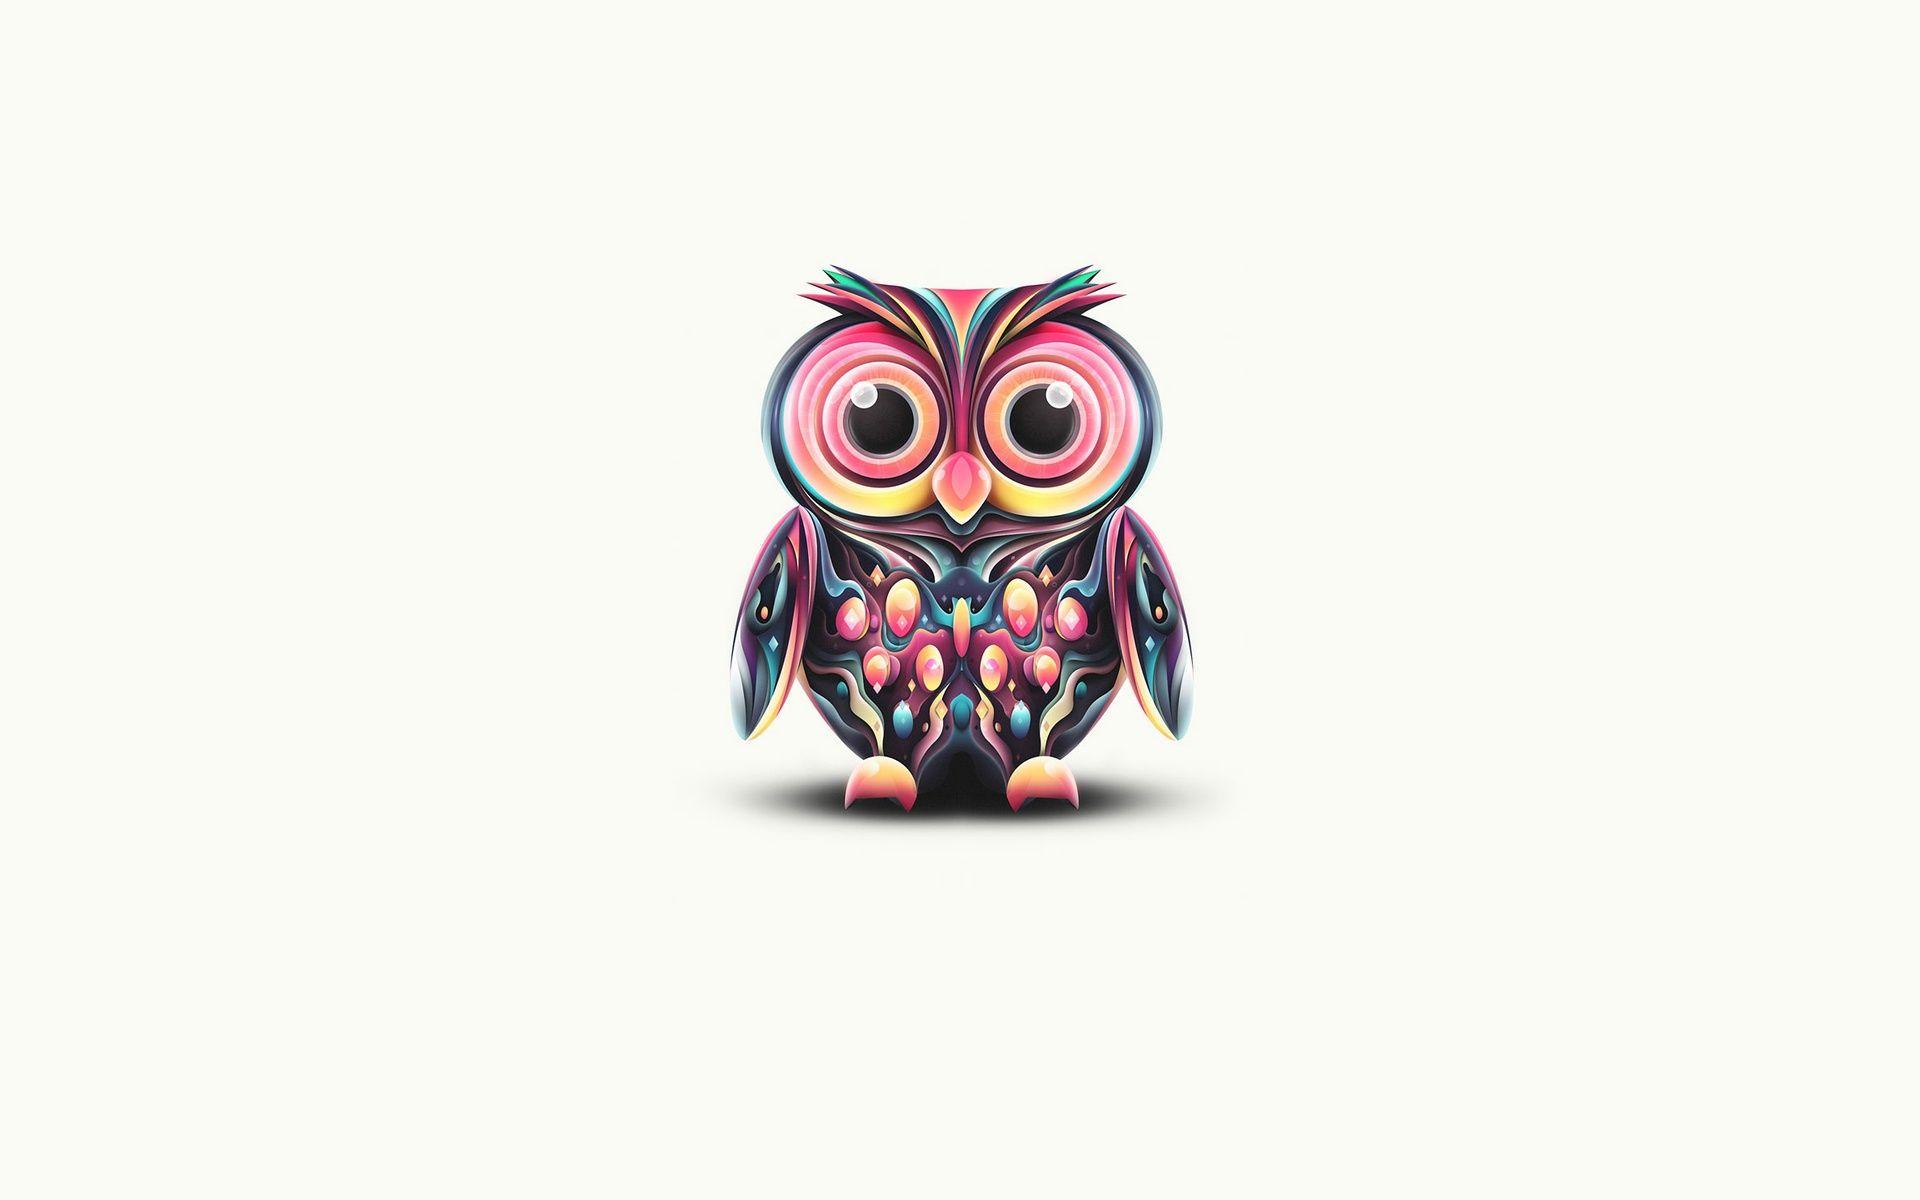 background tumblr owl cute 9. Background Check All